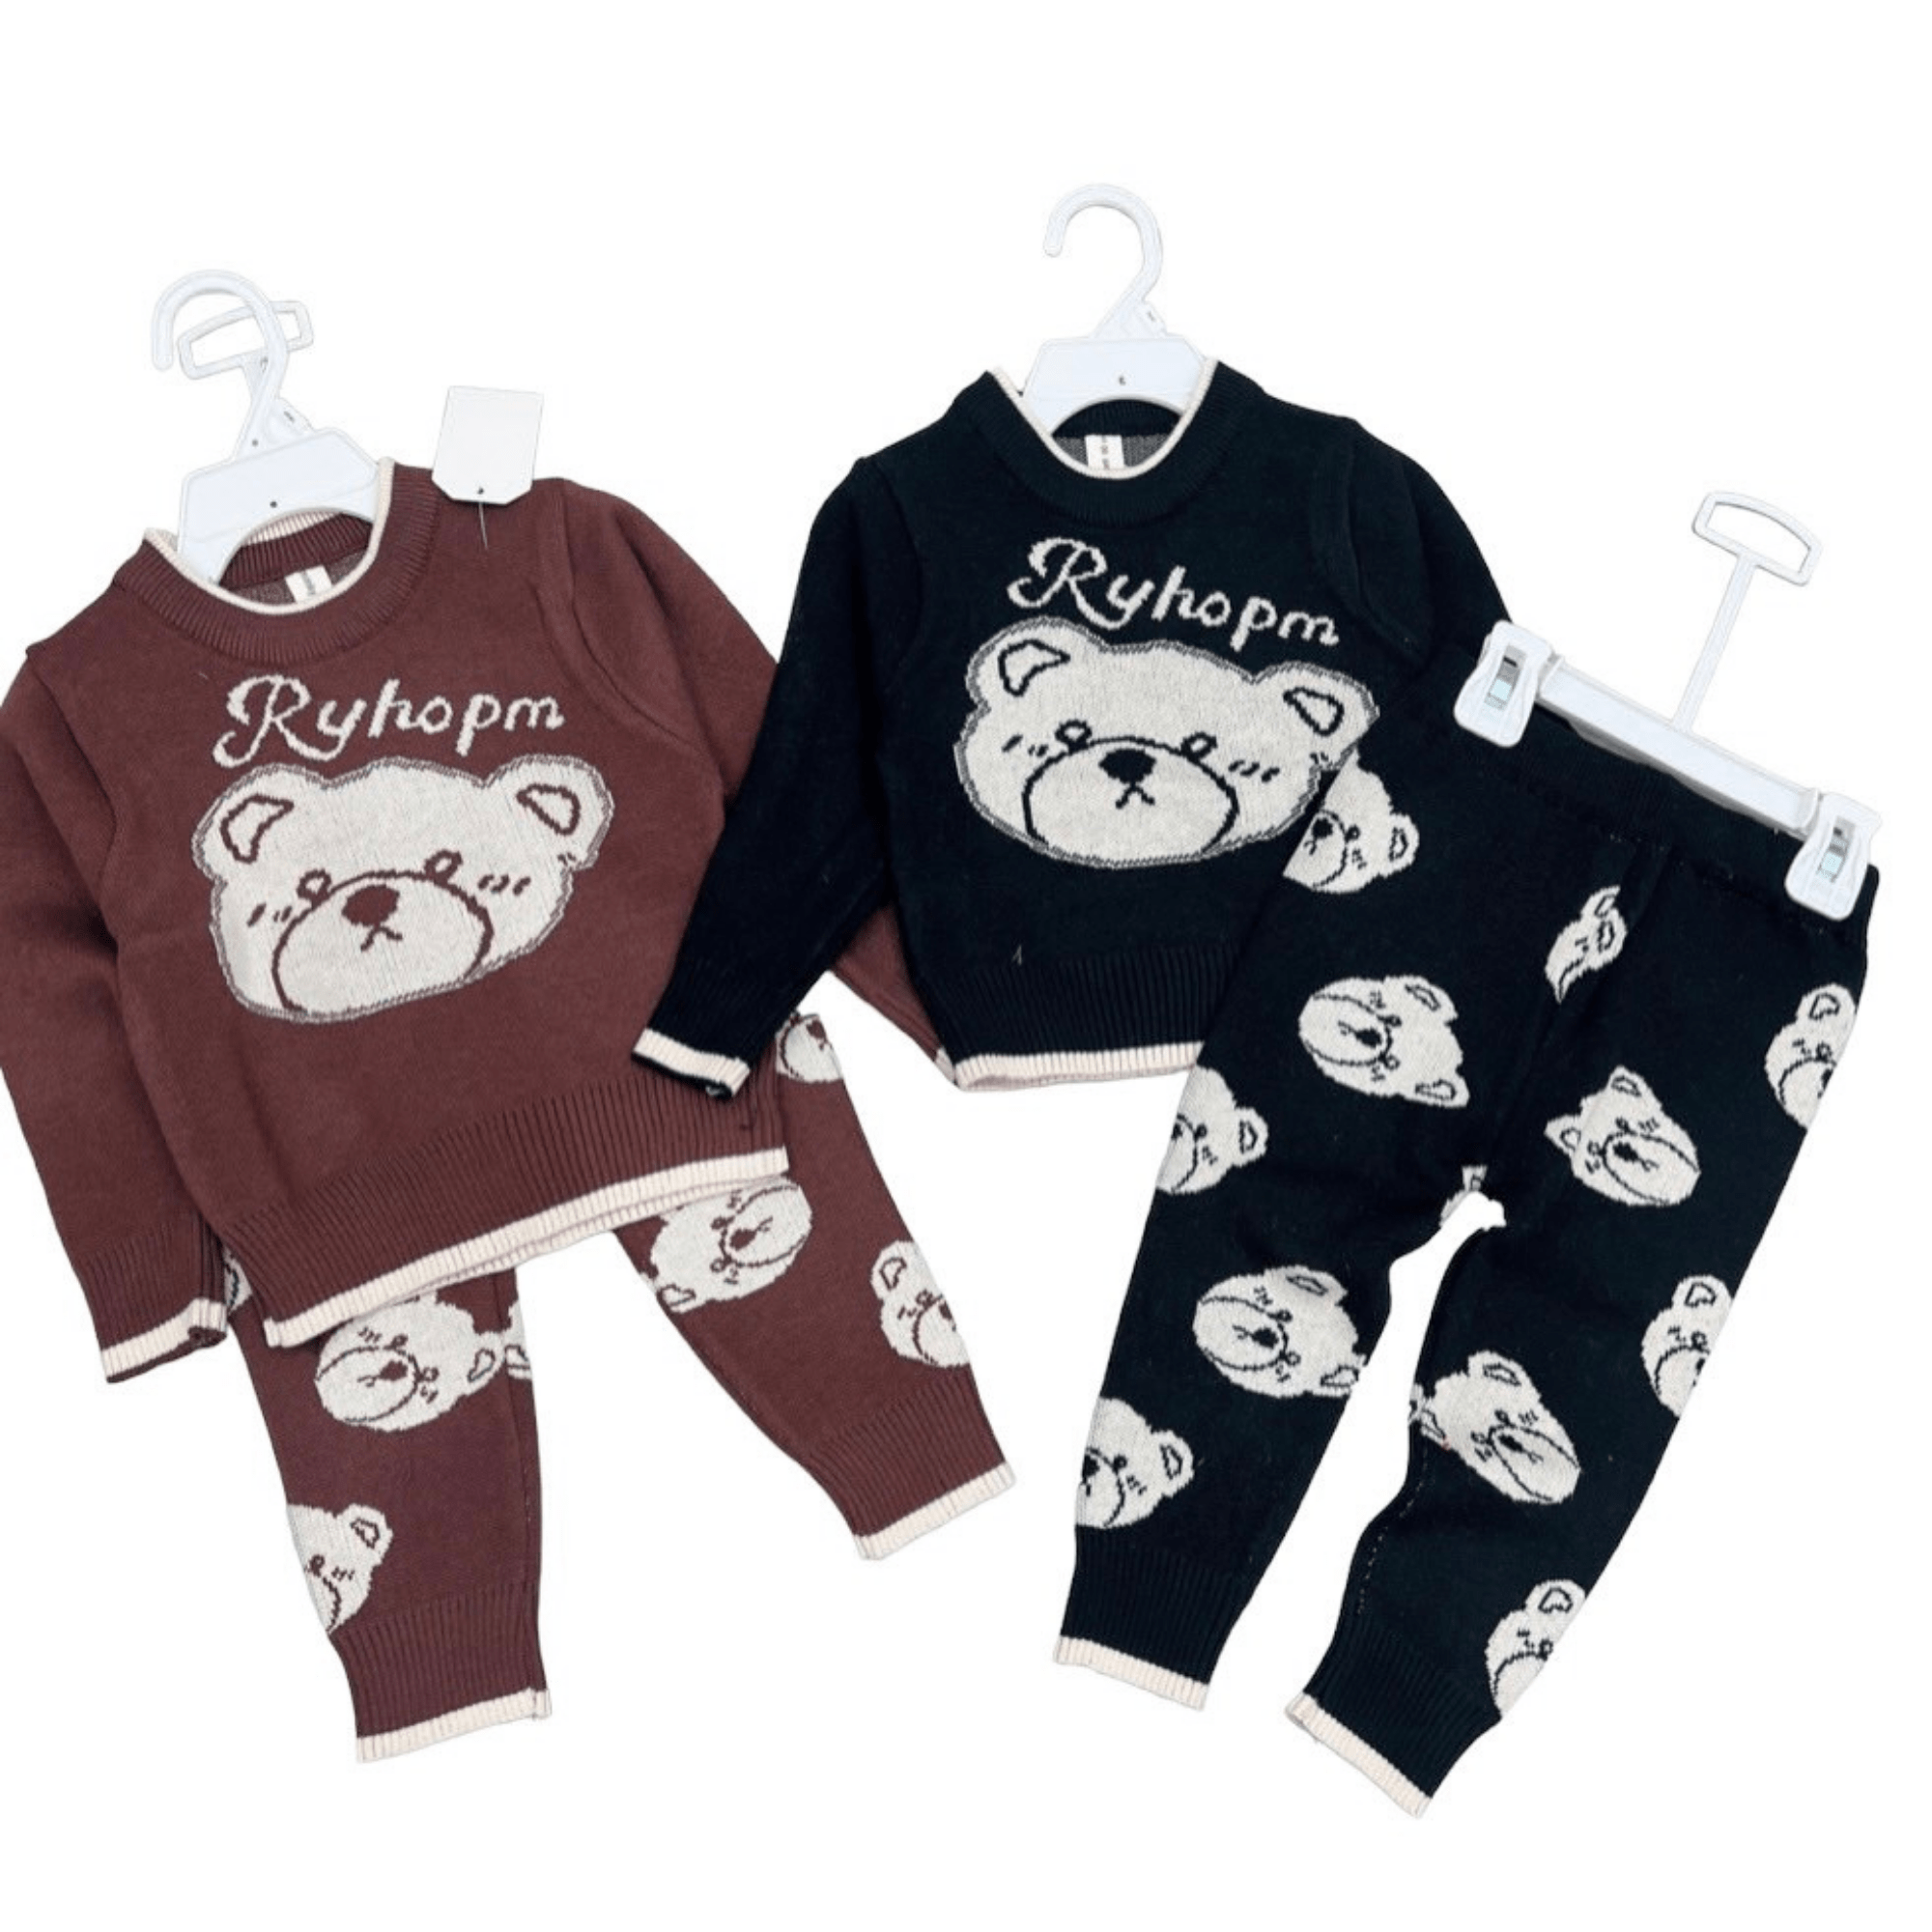 Kids Designers Clothes Fast Delivery Natural Woolen Set New Arrival Each One In Opp Bag From Vietnam Manufacturer